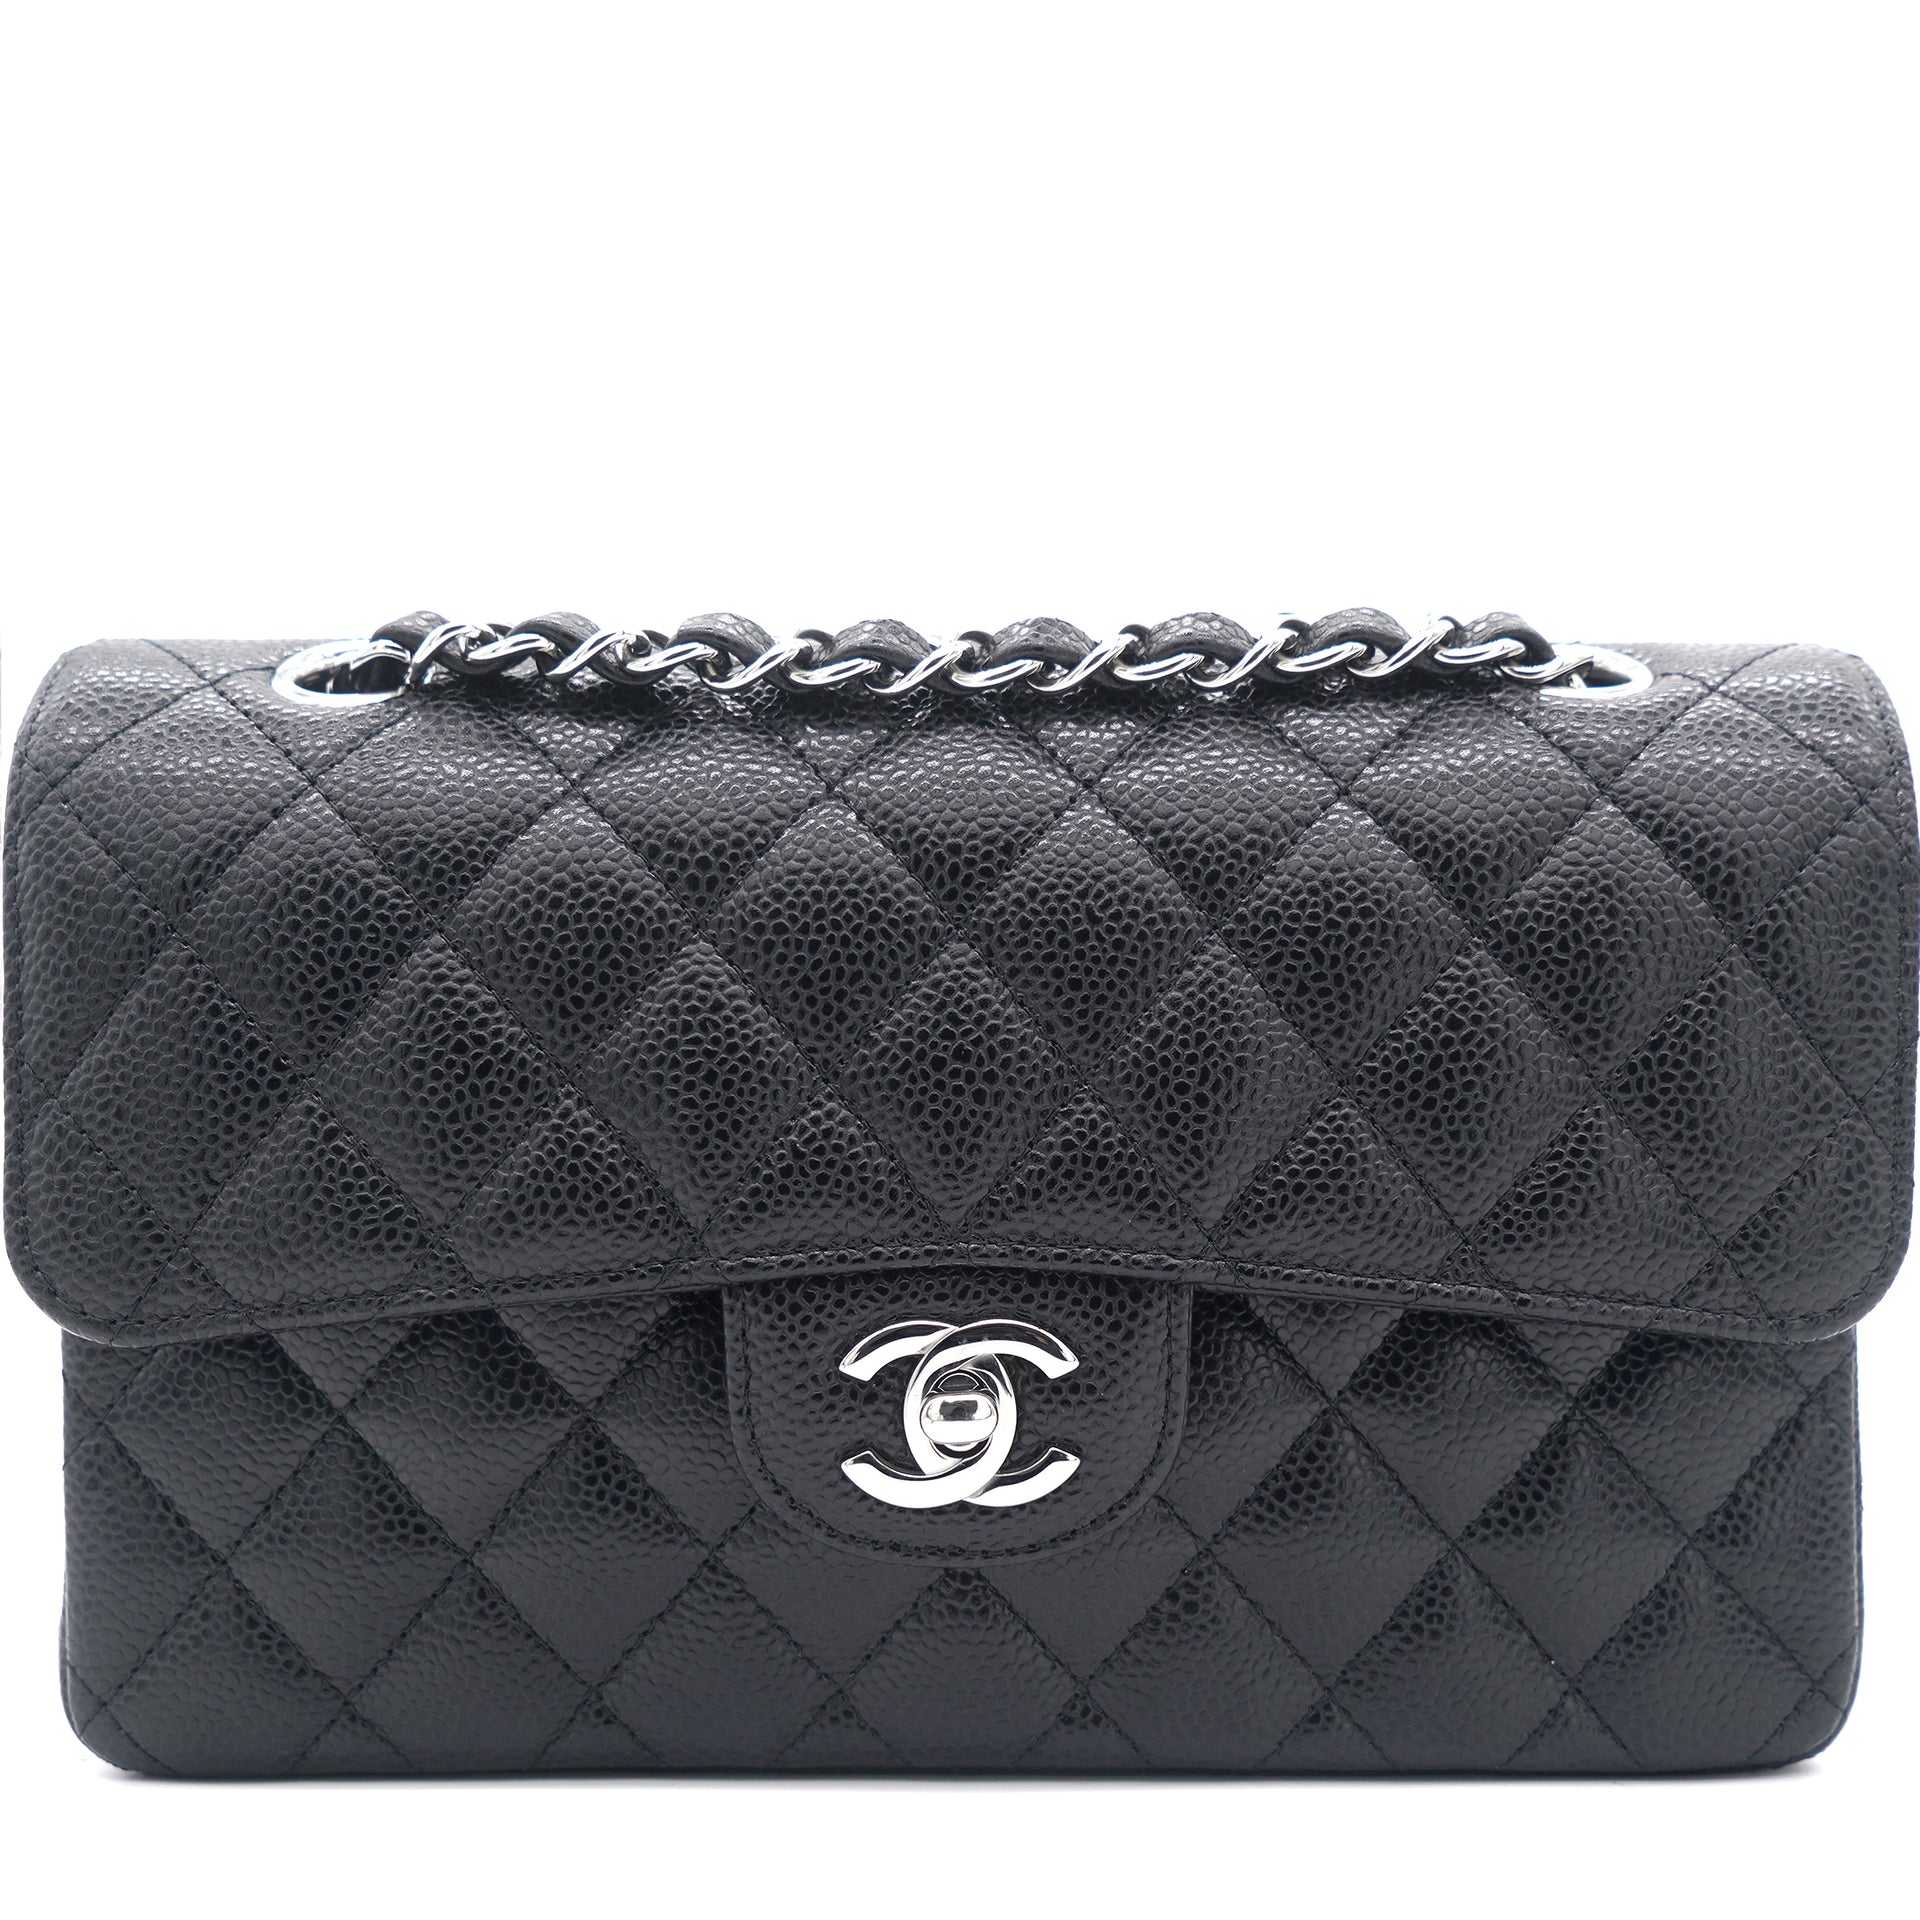 Chanel Classic Flap Bag Hardware Protective Sticker